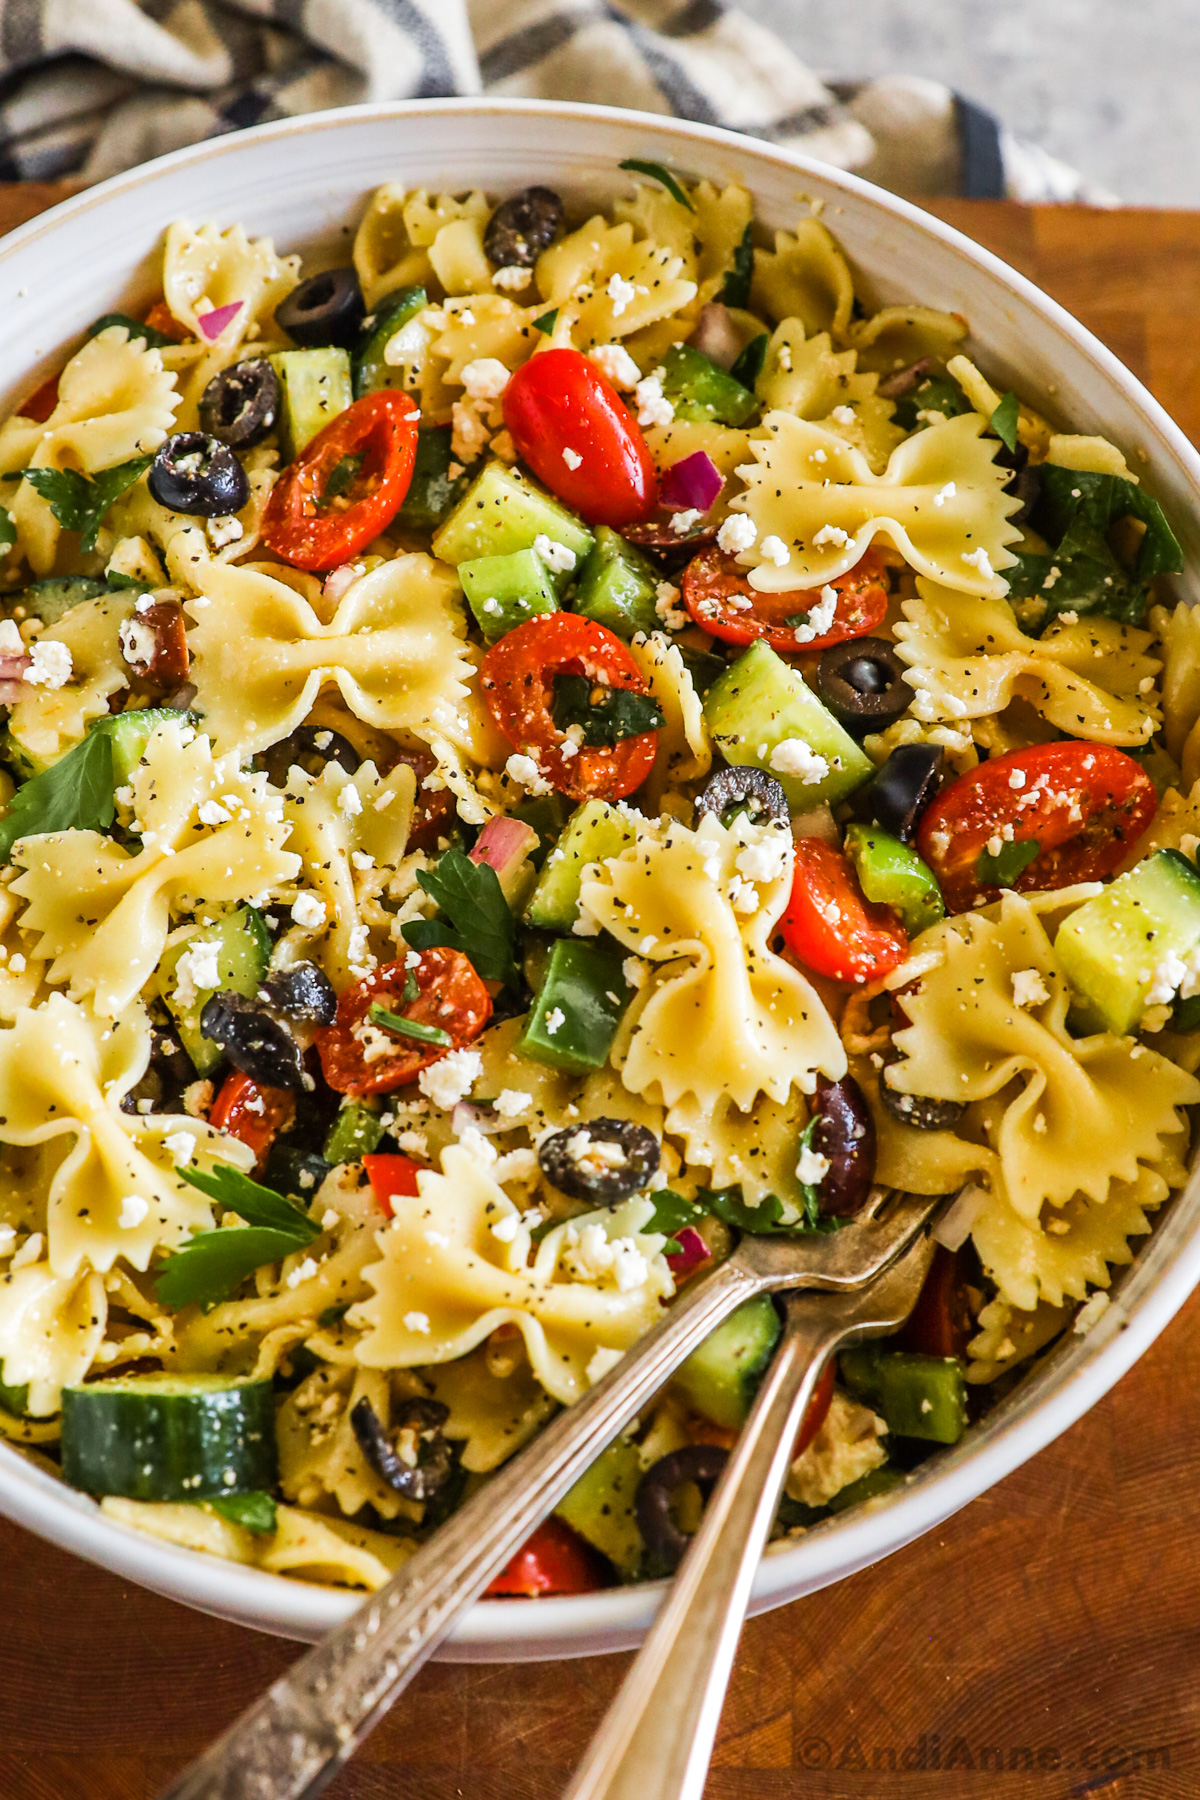 Greek pasta salad recipe with farfalle pasta, tomatoes, olives, bell pepper and feta cheese.